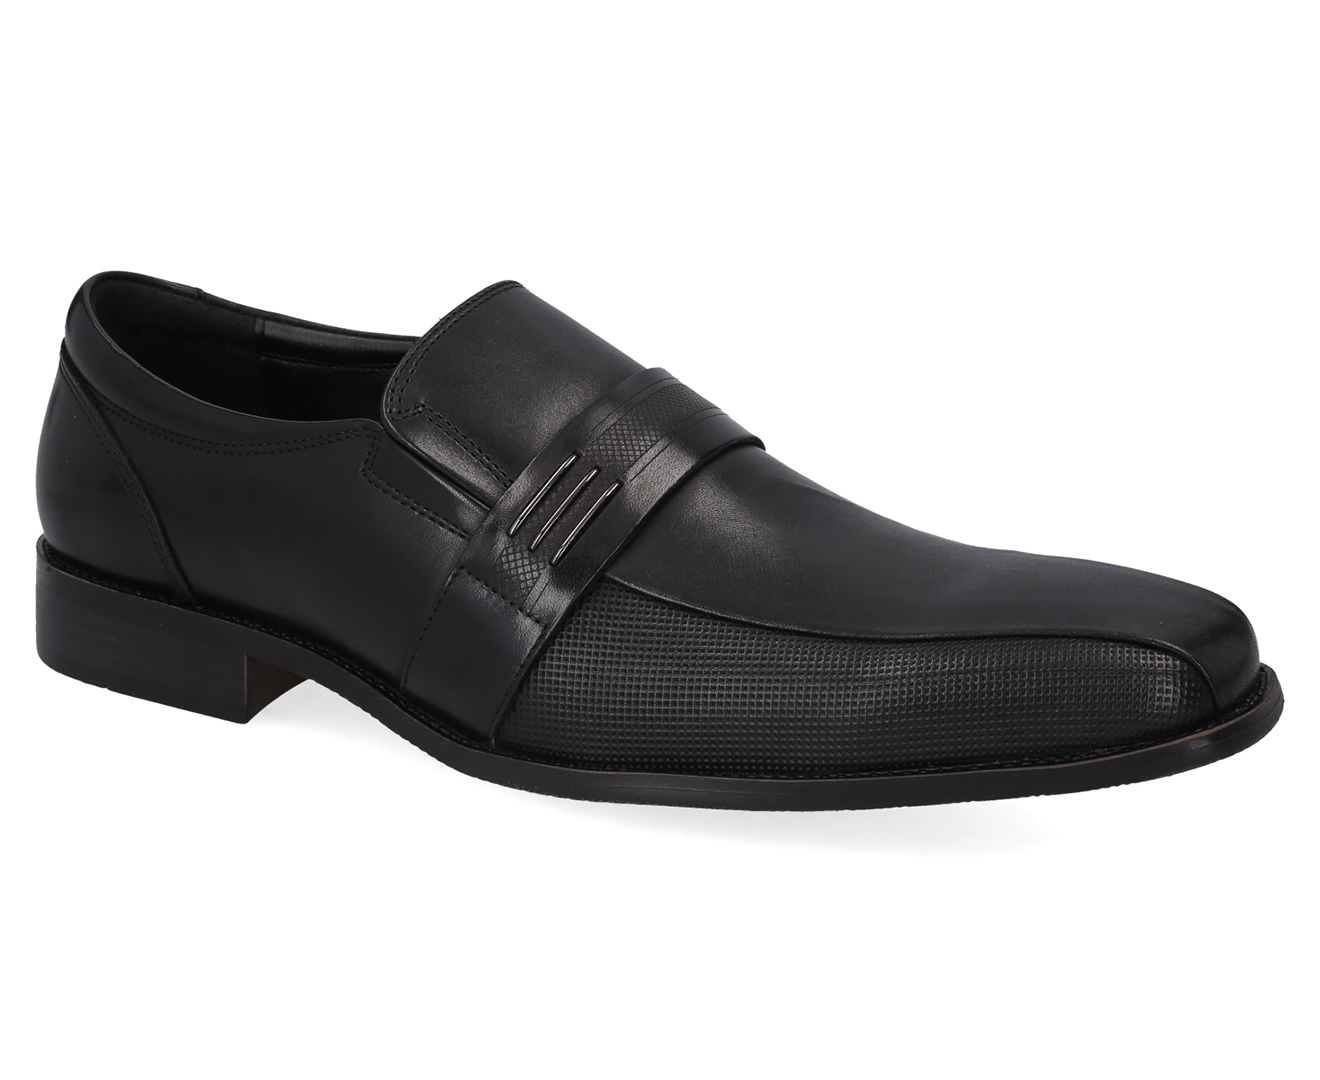 Windsor Smith Men's Dustin Leather Loafers - Black | Catch.co.nz